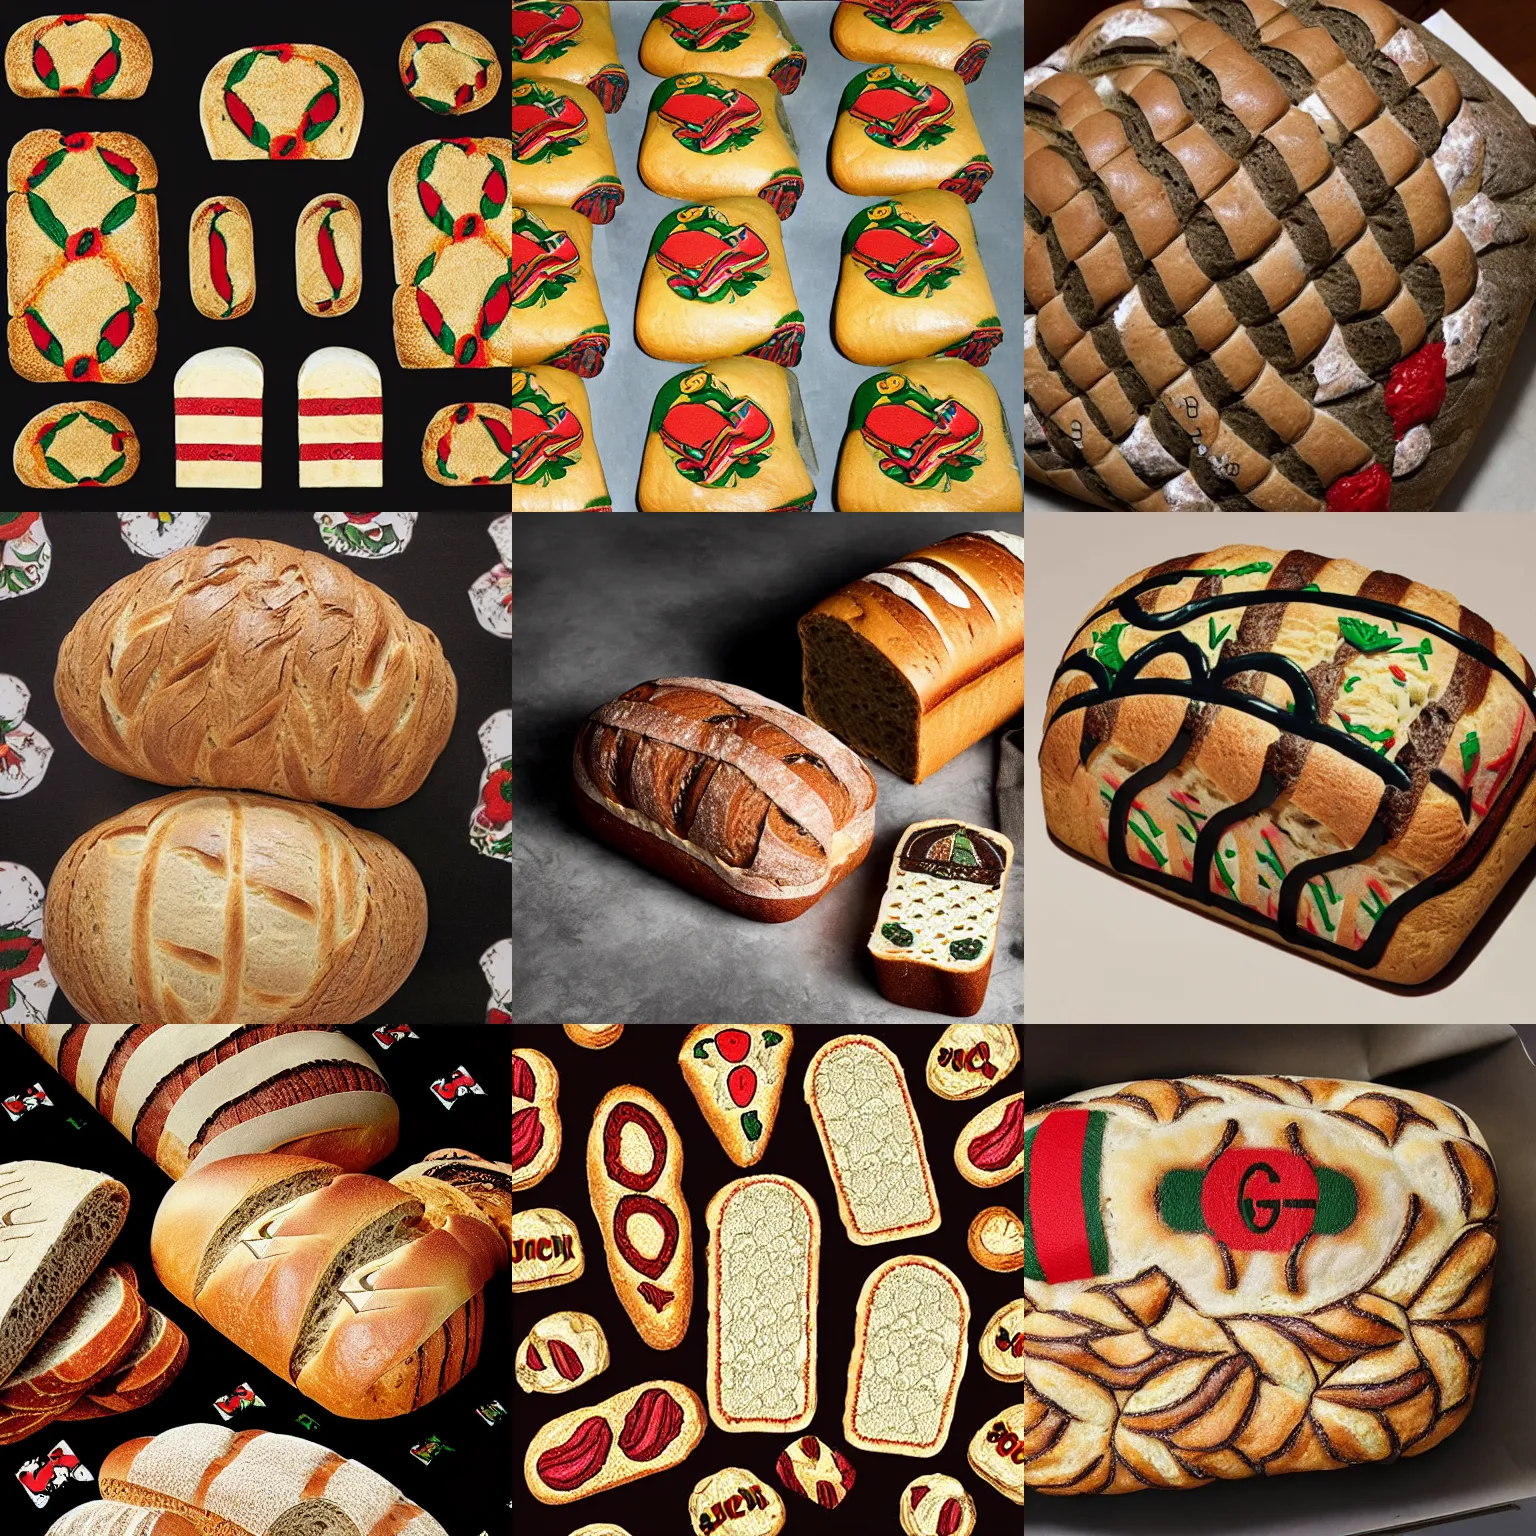 Prompt: gucci bread, bread designed by gucci, bread with gucci pattern, explosions in the background